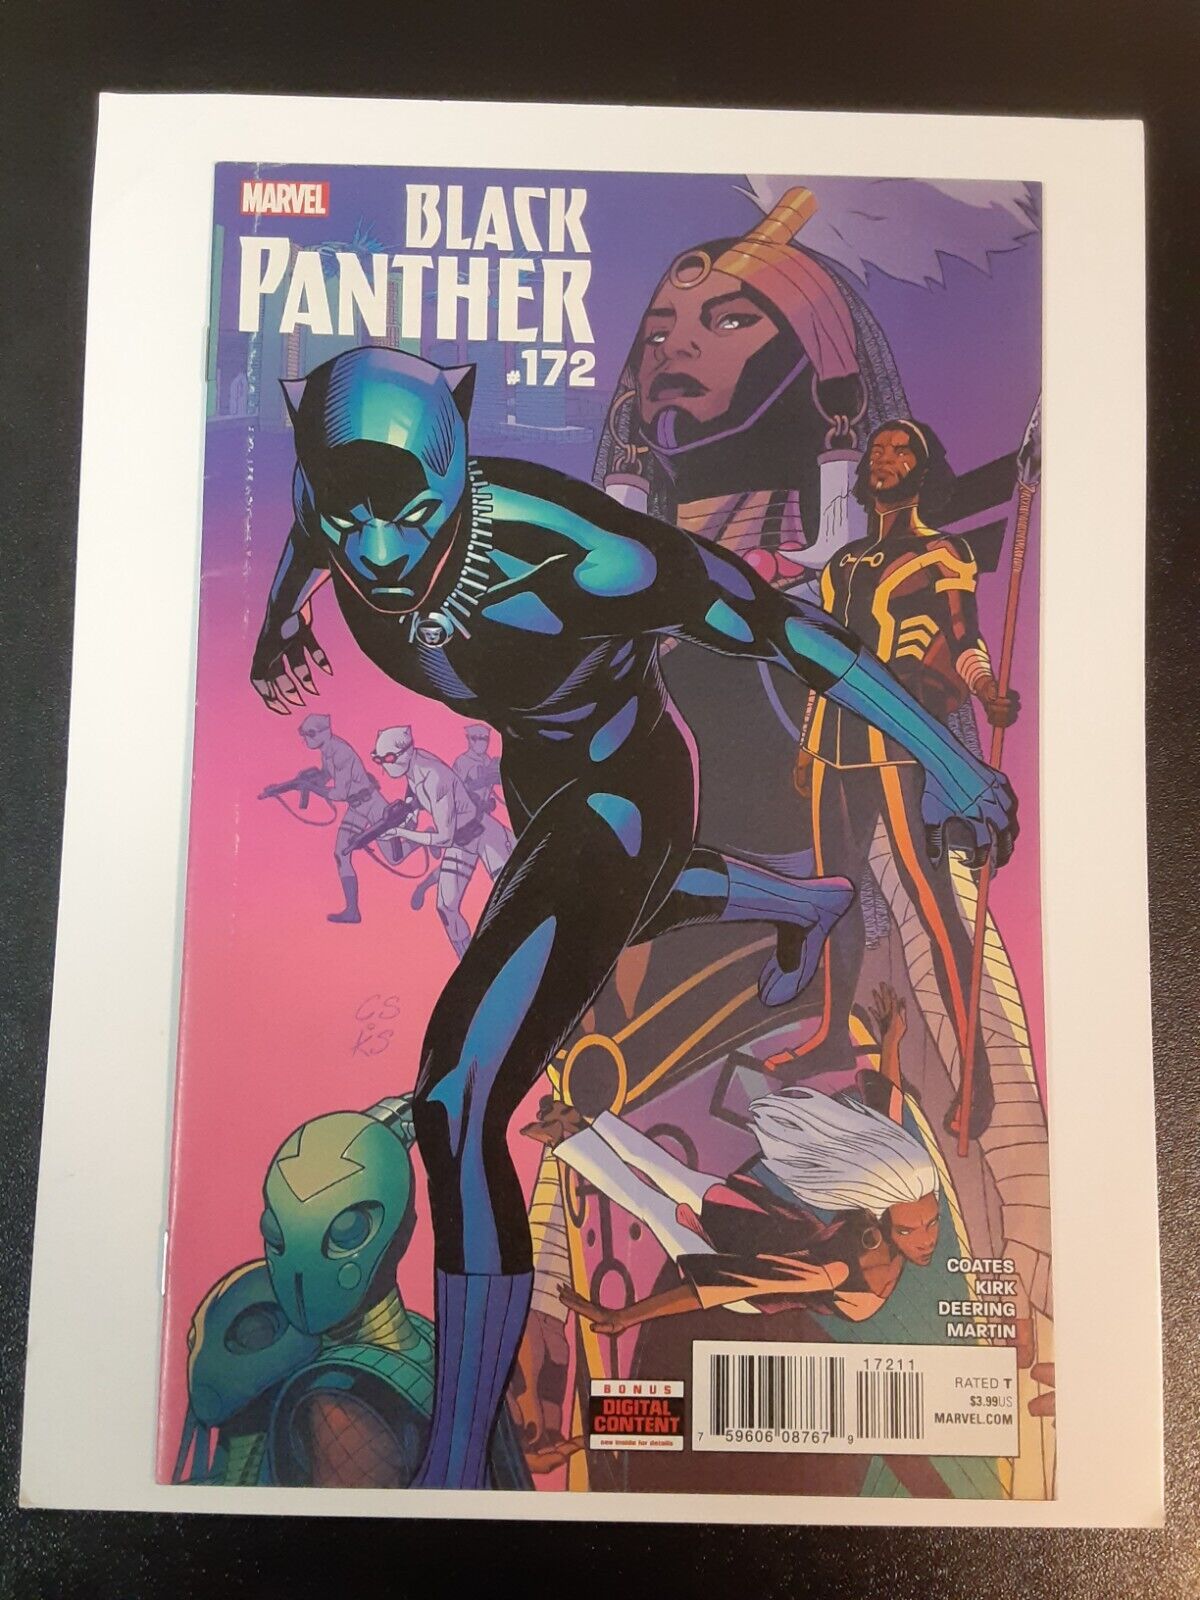 BLACK PANTHER #172 (2017 SERIES) (W) BY TA-NEHISI COATES KLAW STANDS SUPREME